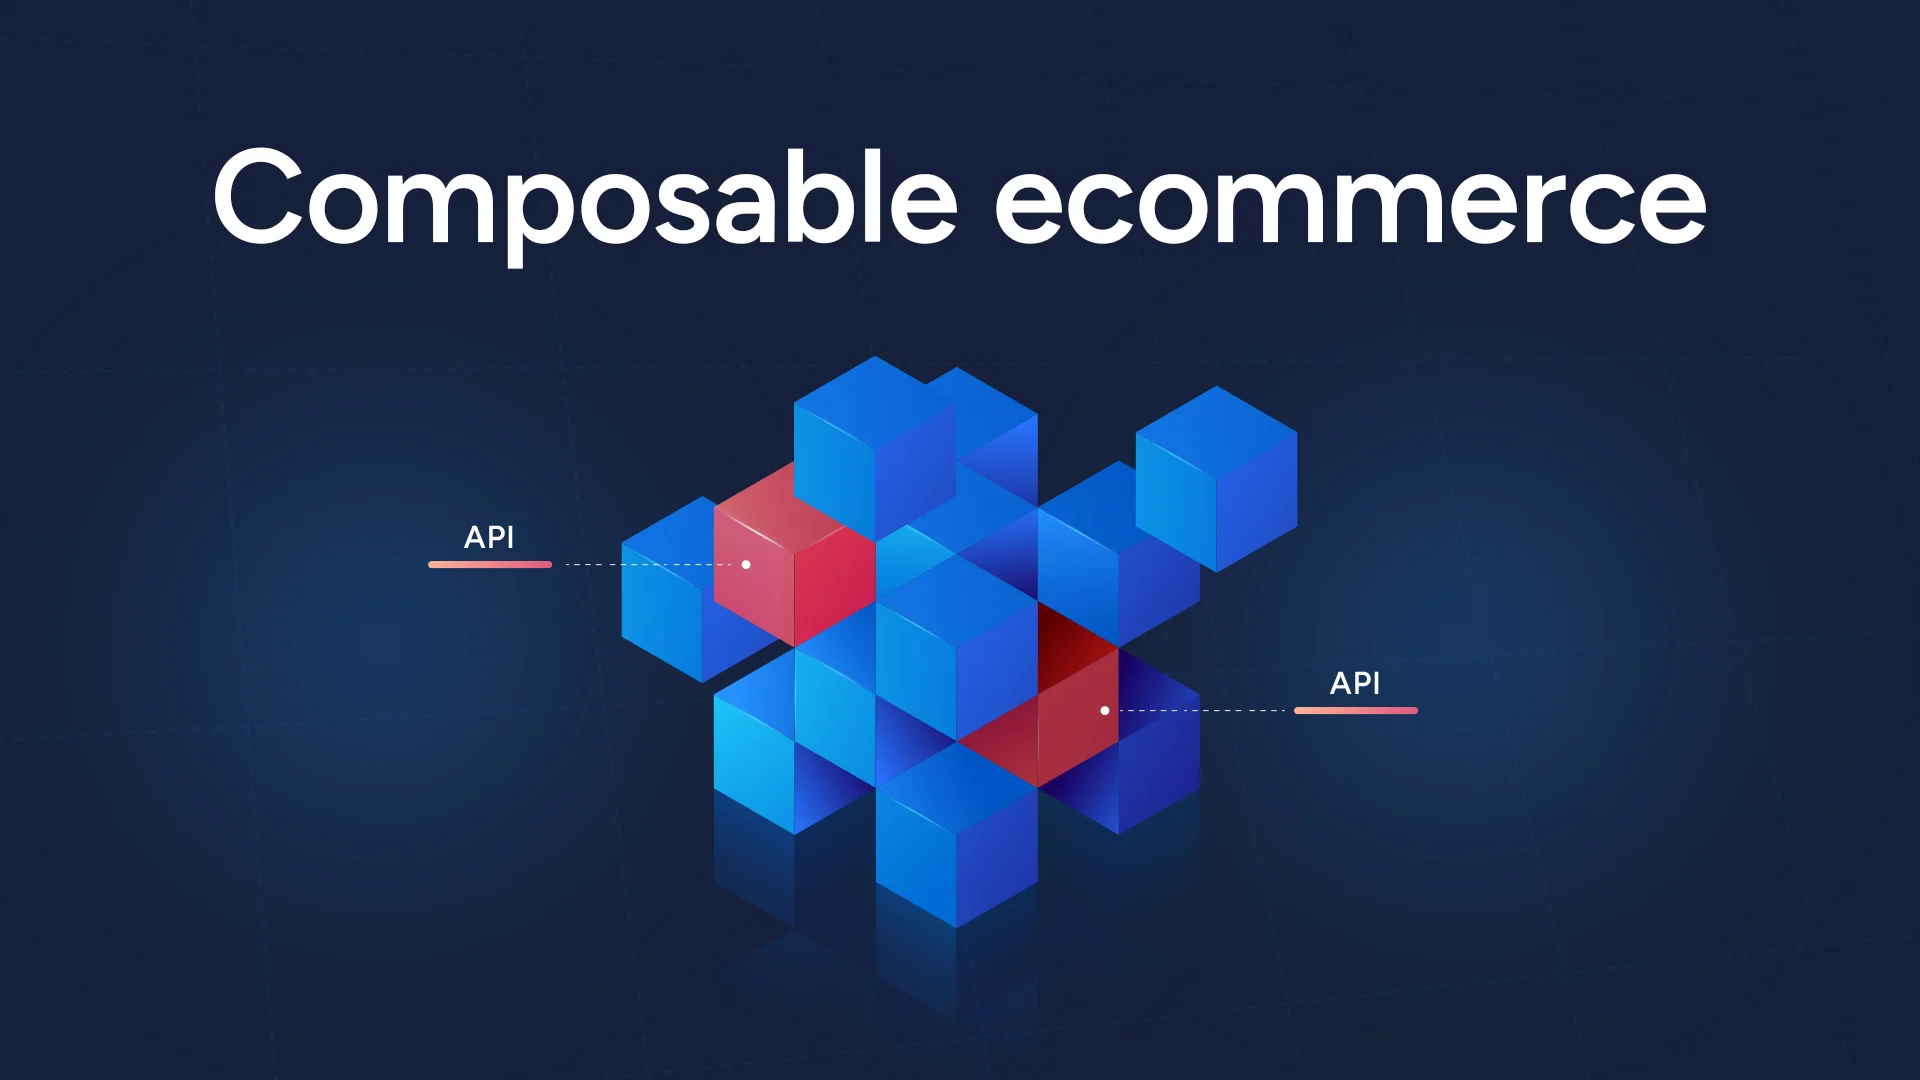 What is Composable Commerce?